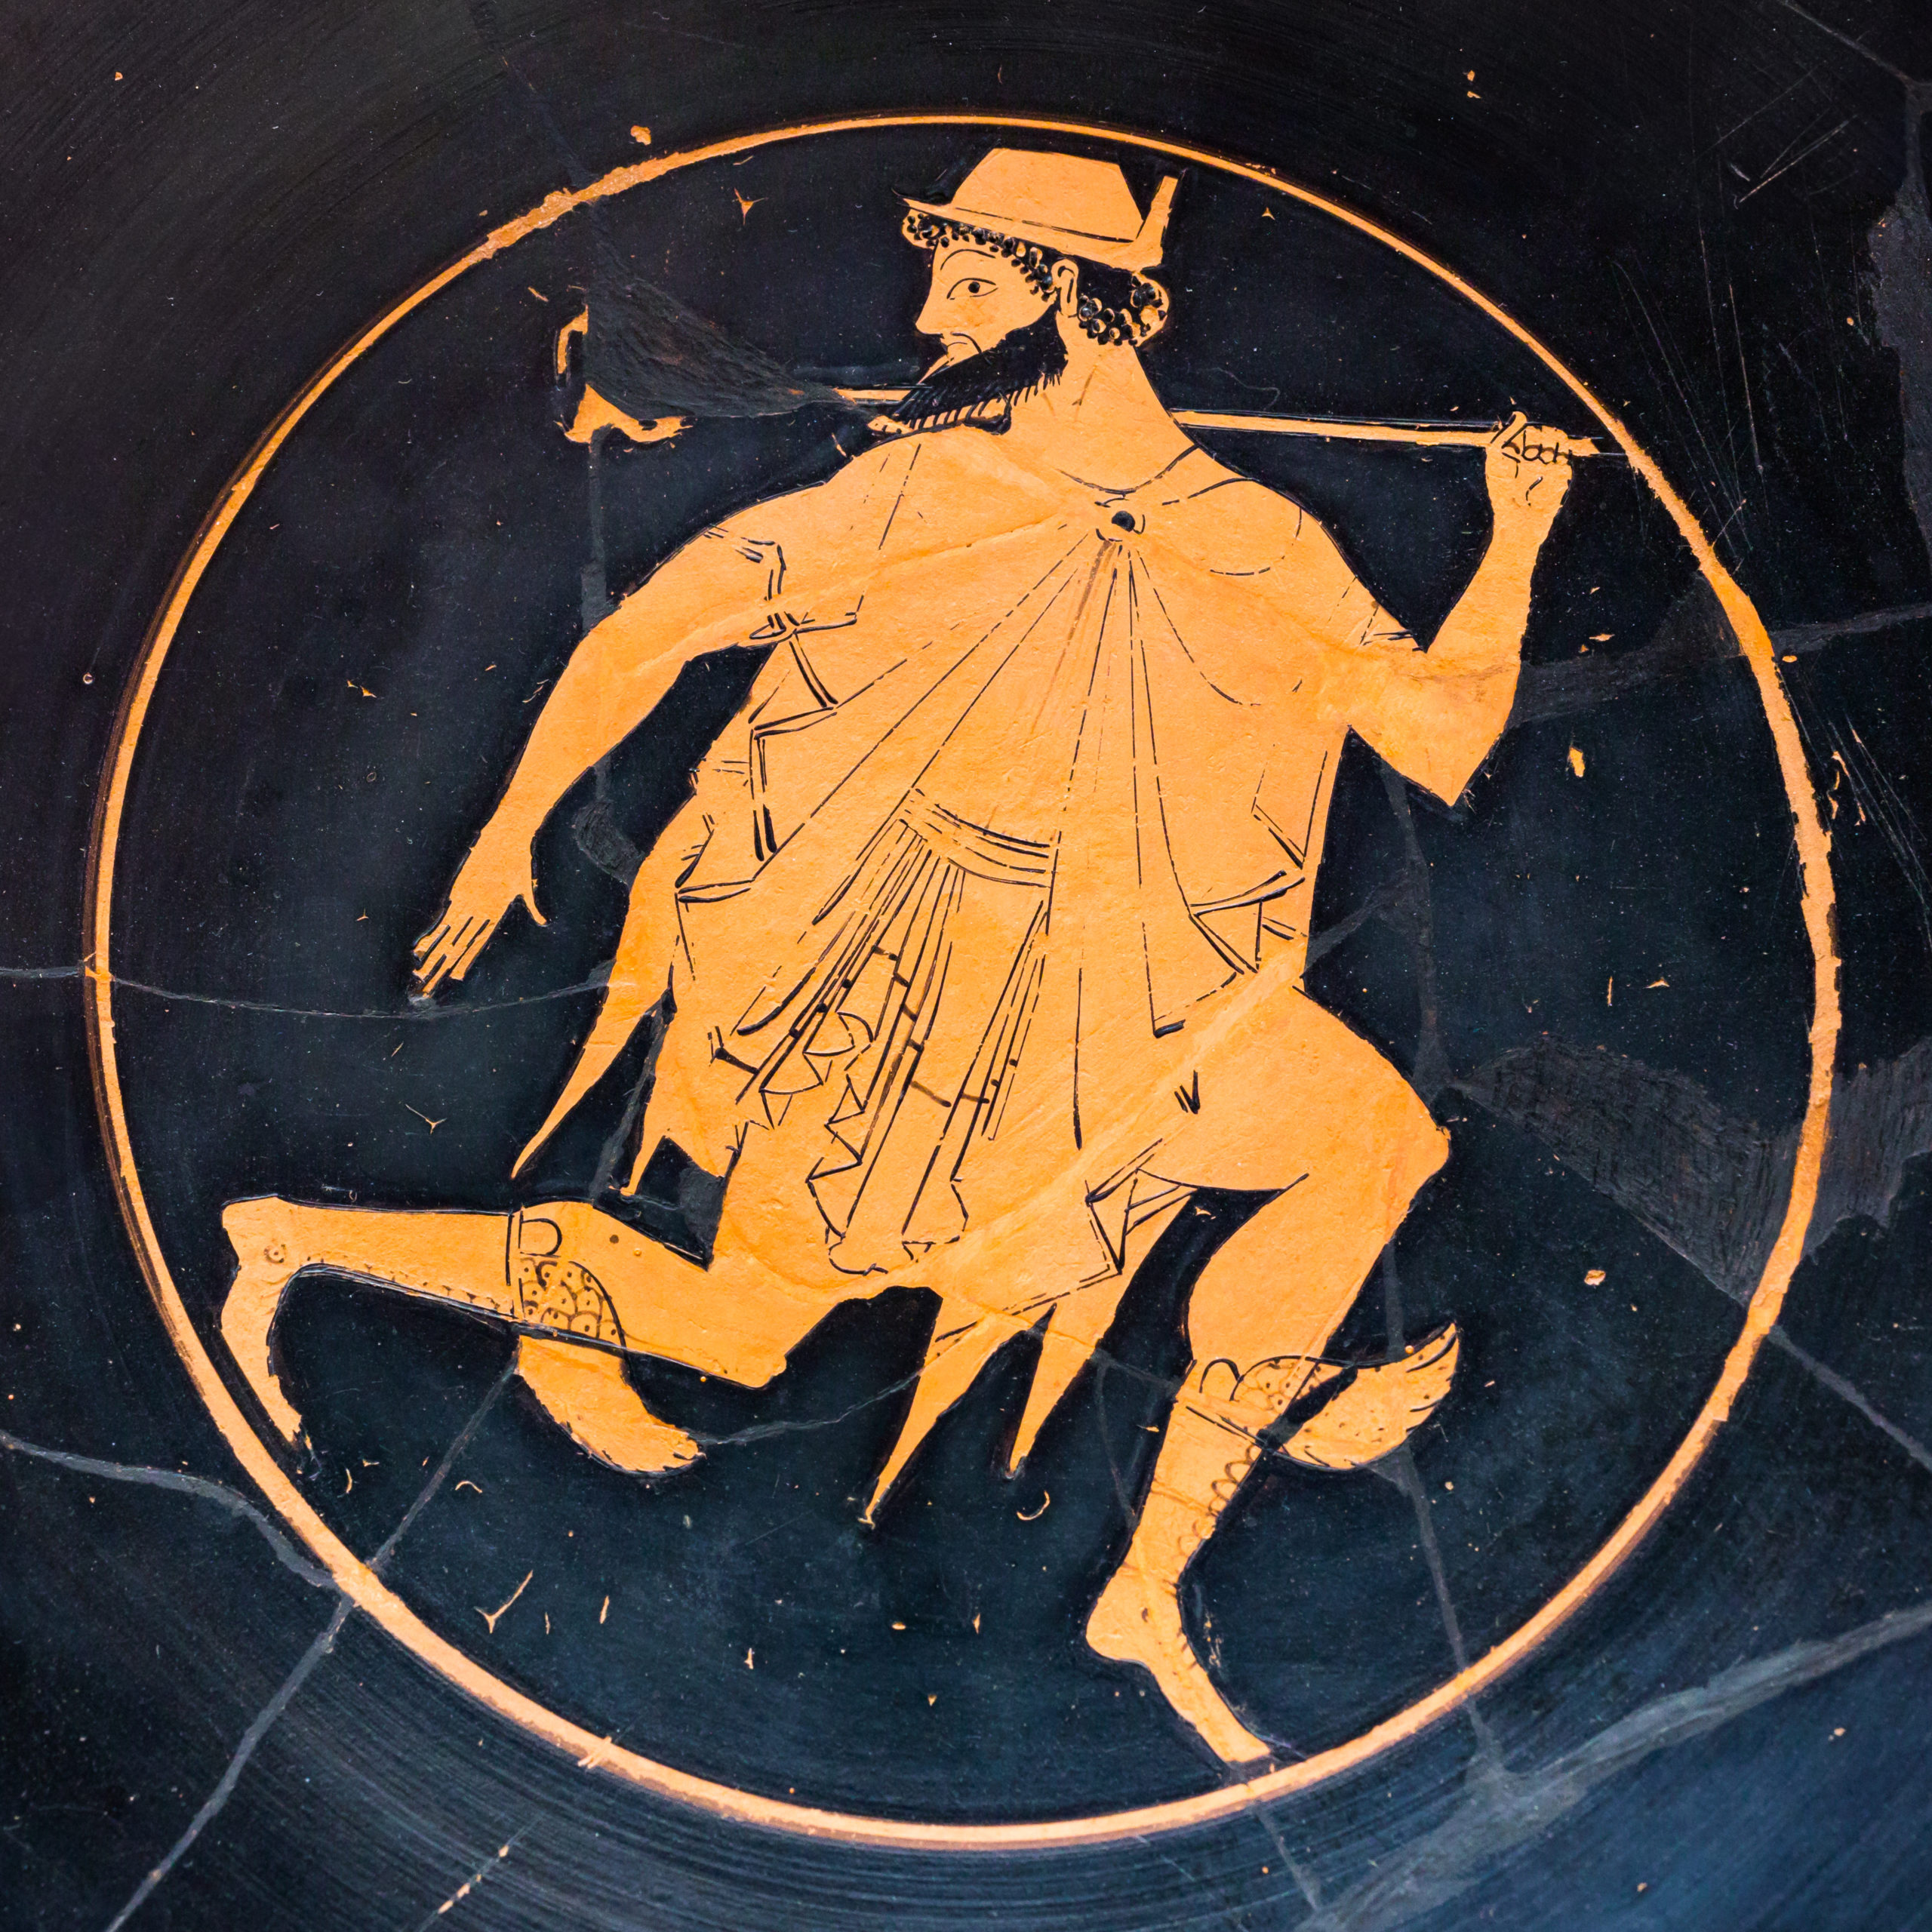 Hermes running. He is a bearded man wearing a chlamys cloak, petasos hat, and winged boots. He holds a scepter over one shoulder.